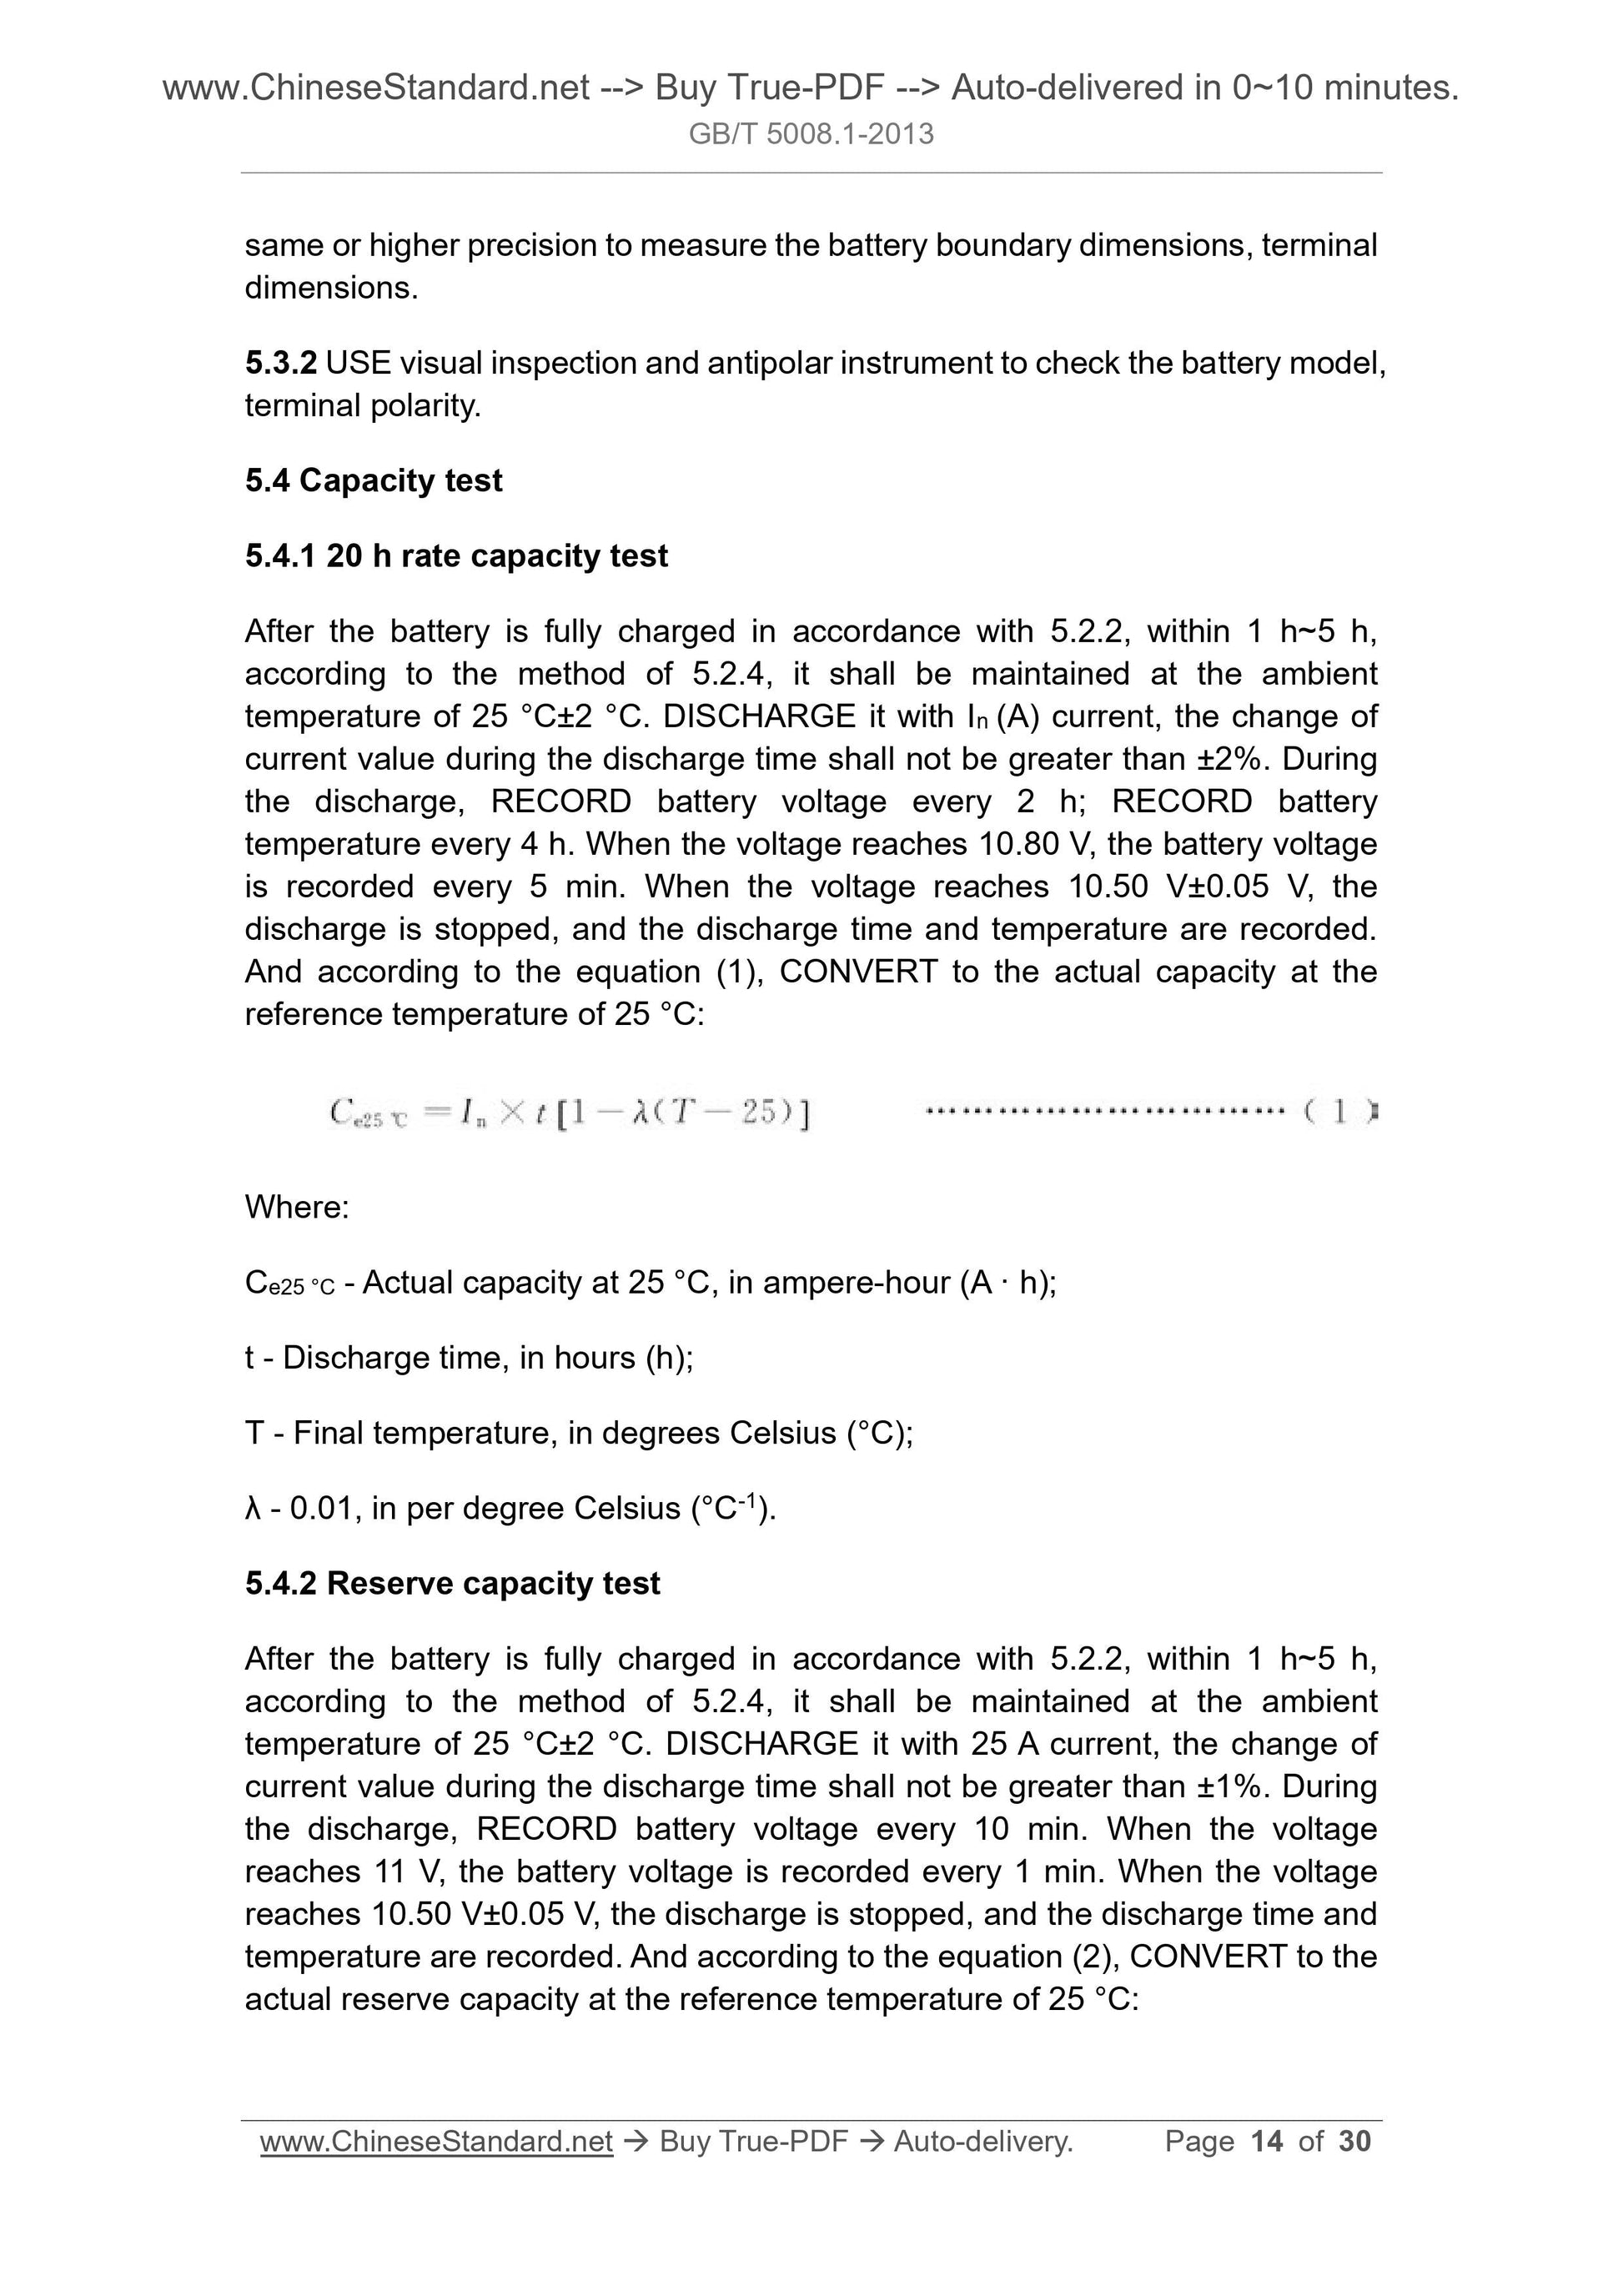 GB/T 5008.1-2013 Page 6